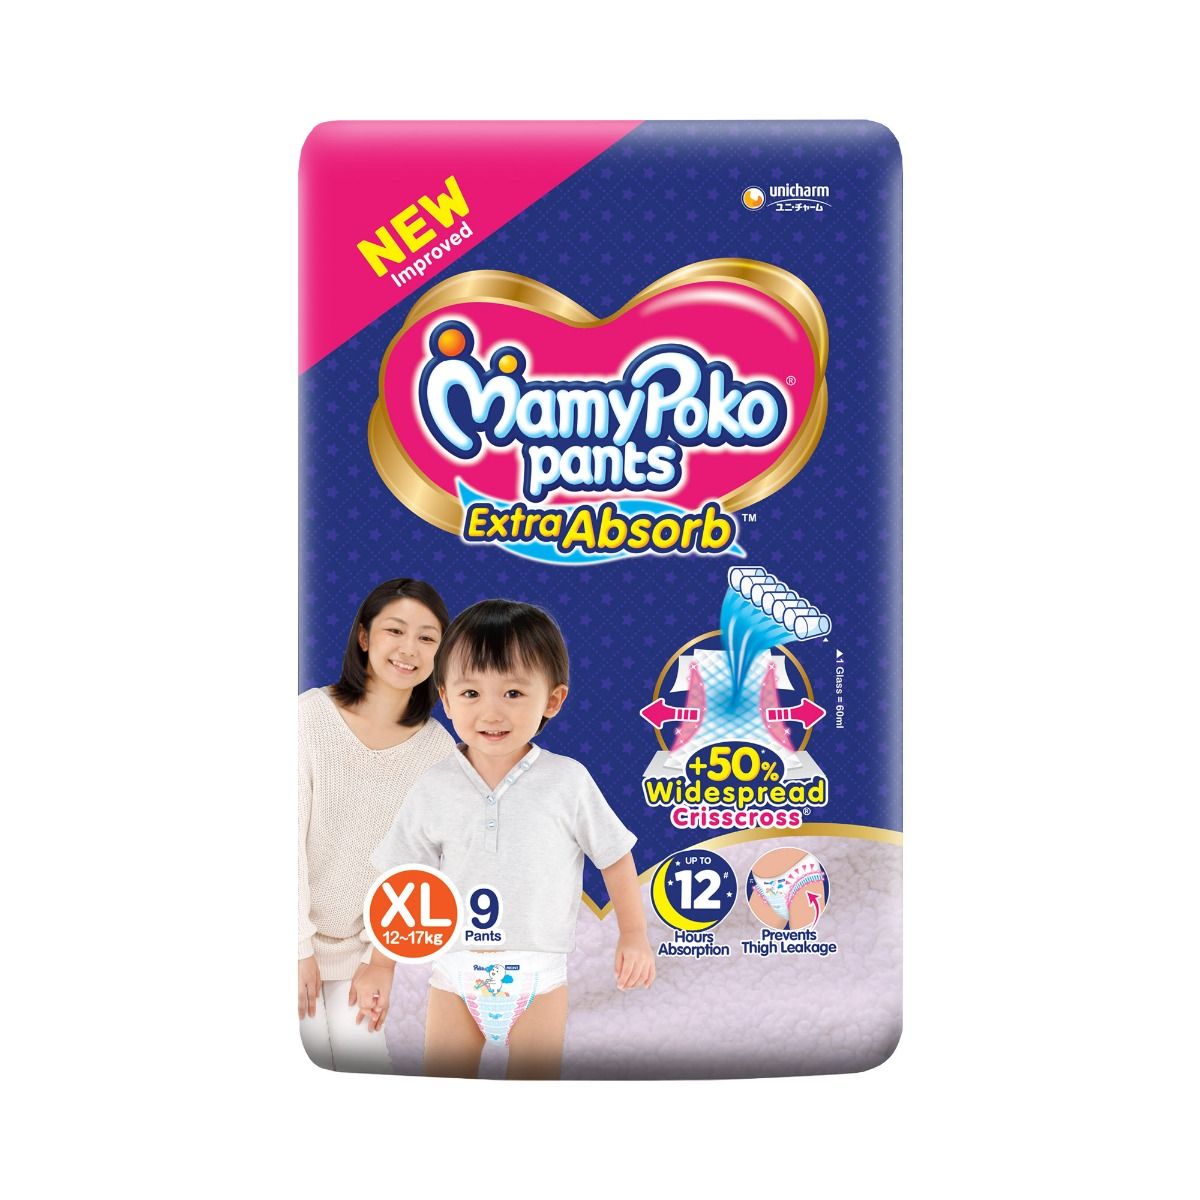 MamyPoko Extra Absorb Diaper Pants XL, 9 Count, Pack of 1 